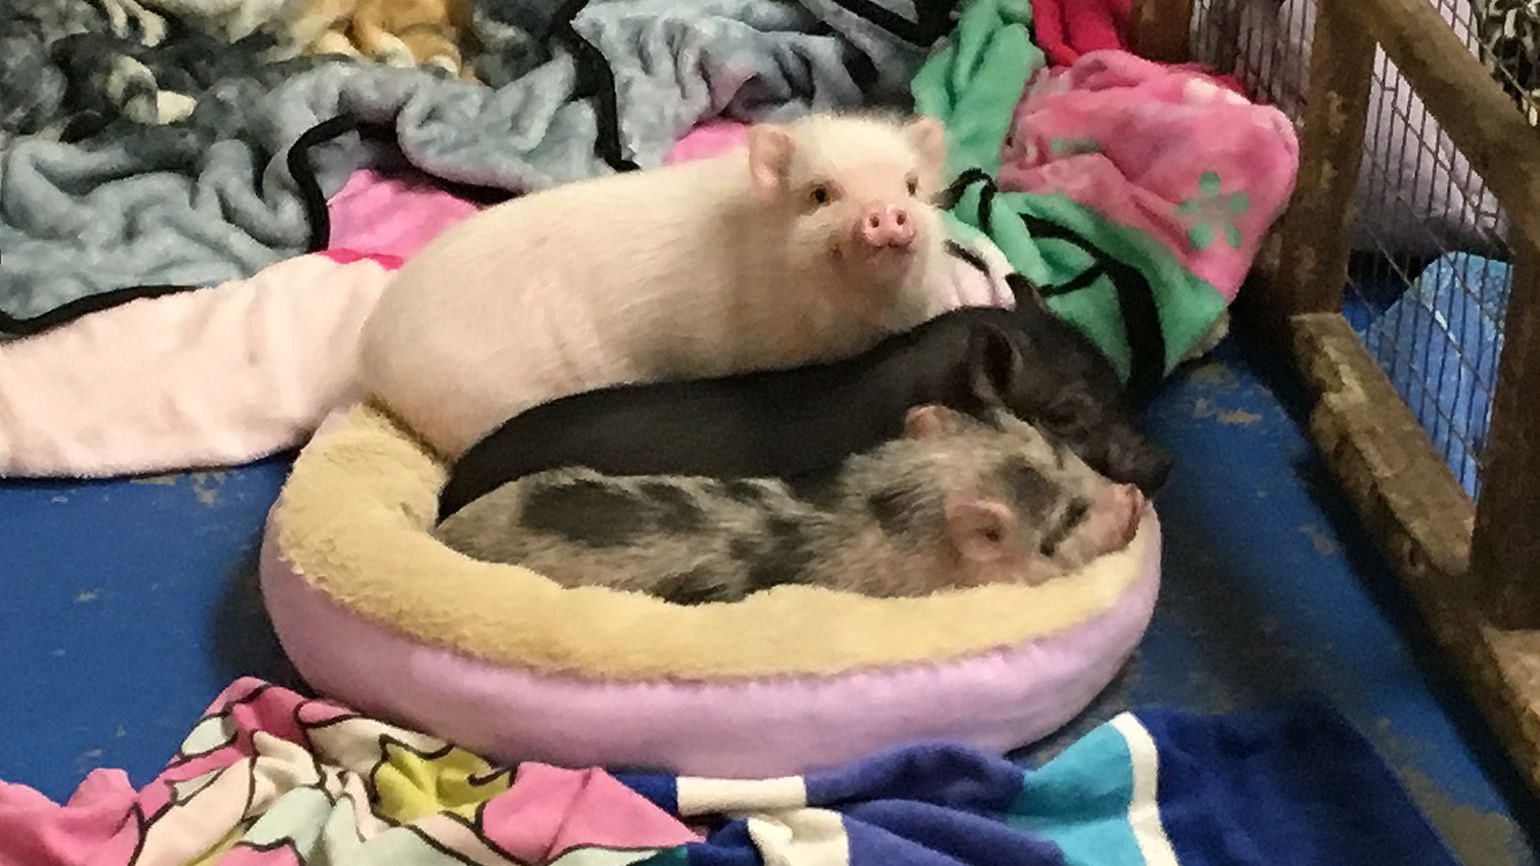 Snuggling with their brothers and sisters is one of the piglets' favorite pastimes.